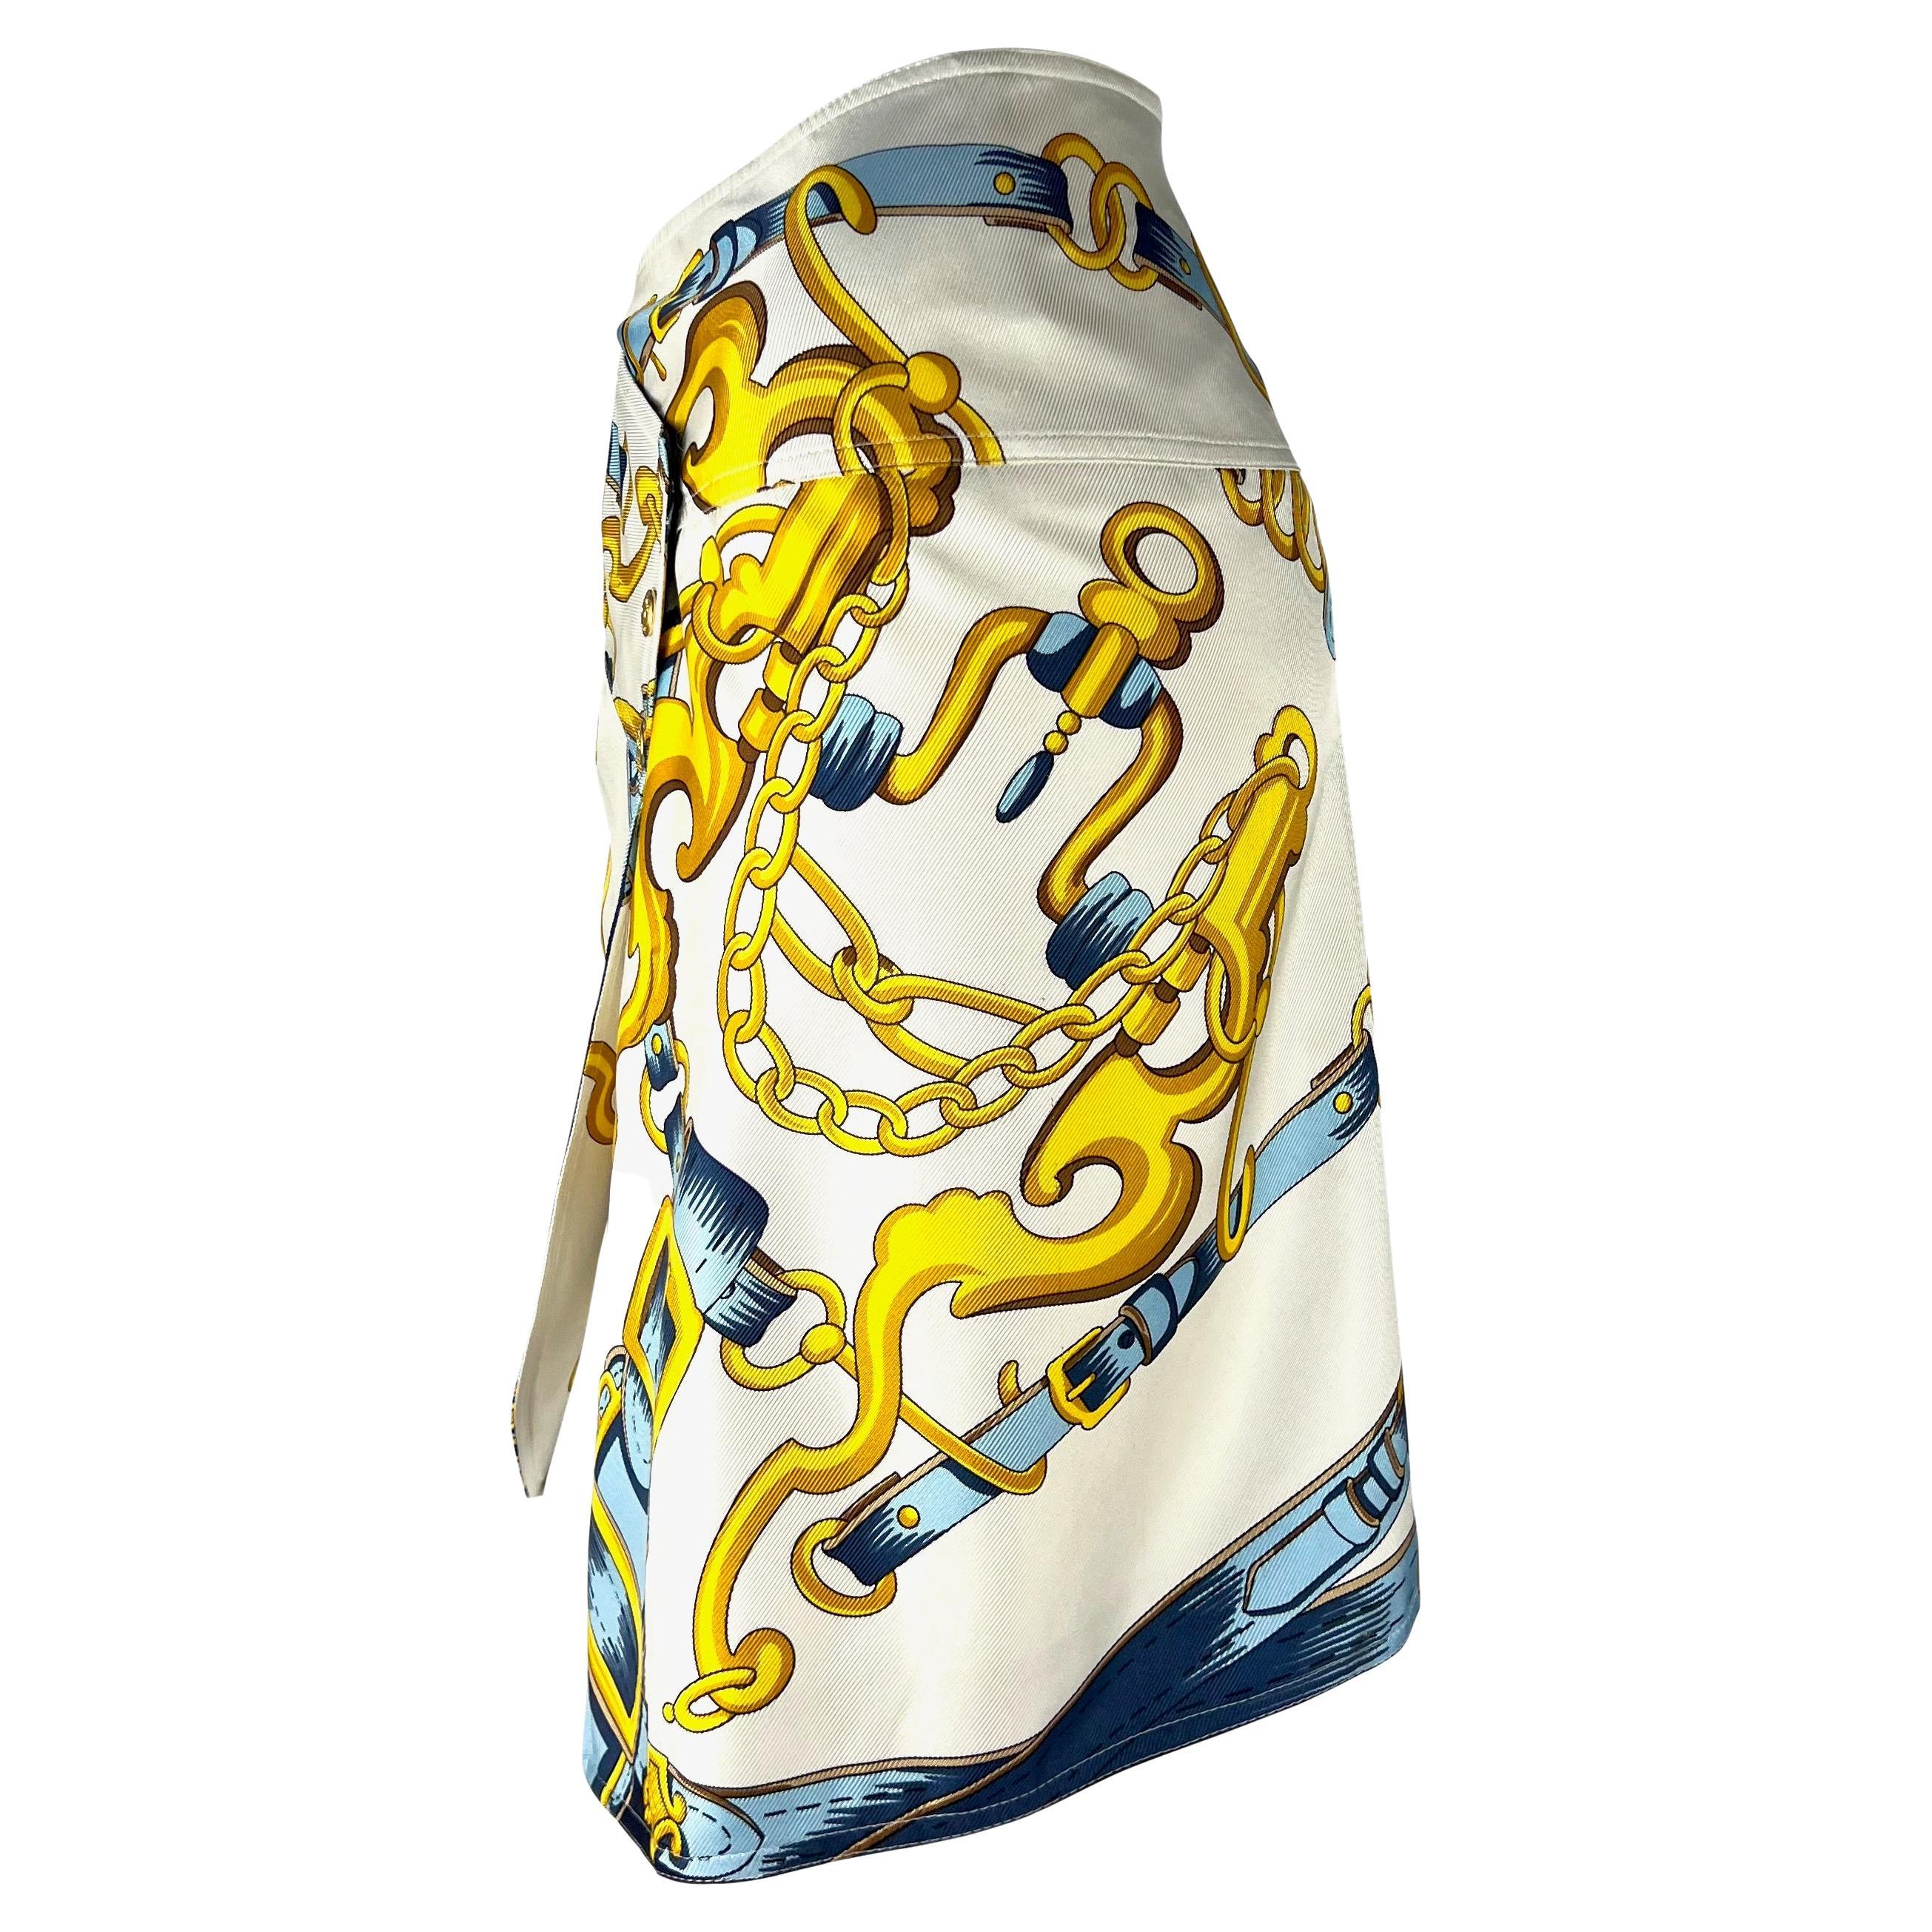 S/S 2000 Christian Dior by John Galliano Runway White Silk Horsebit Print Skirt In Good Condition For Sale In West Hollywood, CA